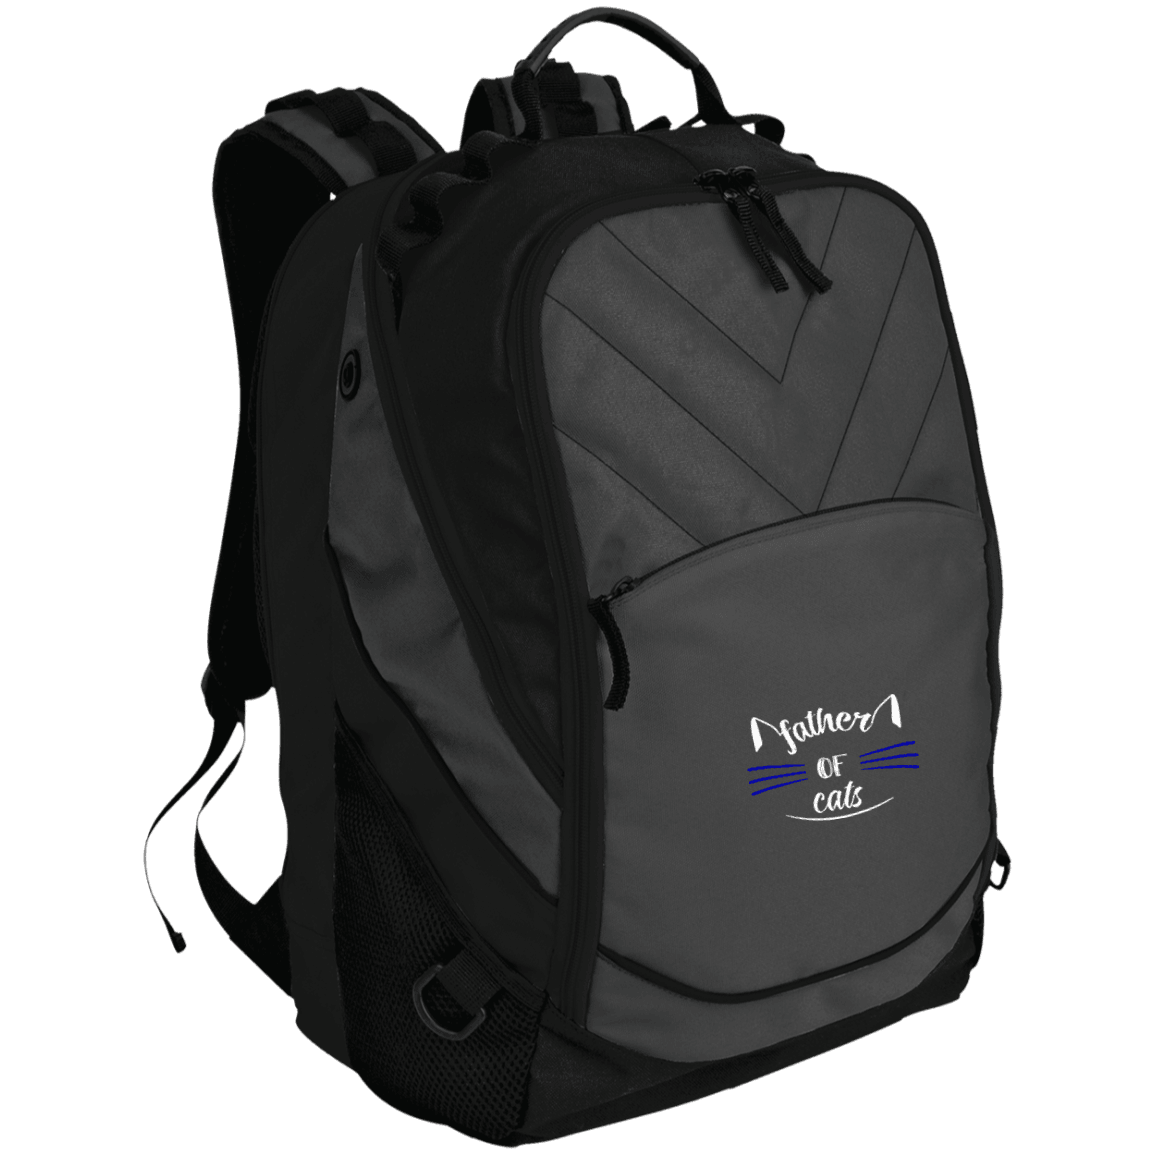 Designs by MyUtopia Shout Out:Father of Cats Embroidered Laptop Computer Backpack,Dark Charcoal/Black / One Size,Backpacks